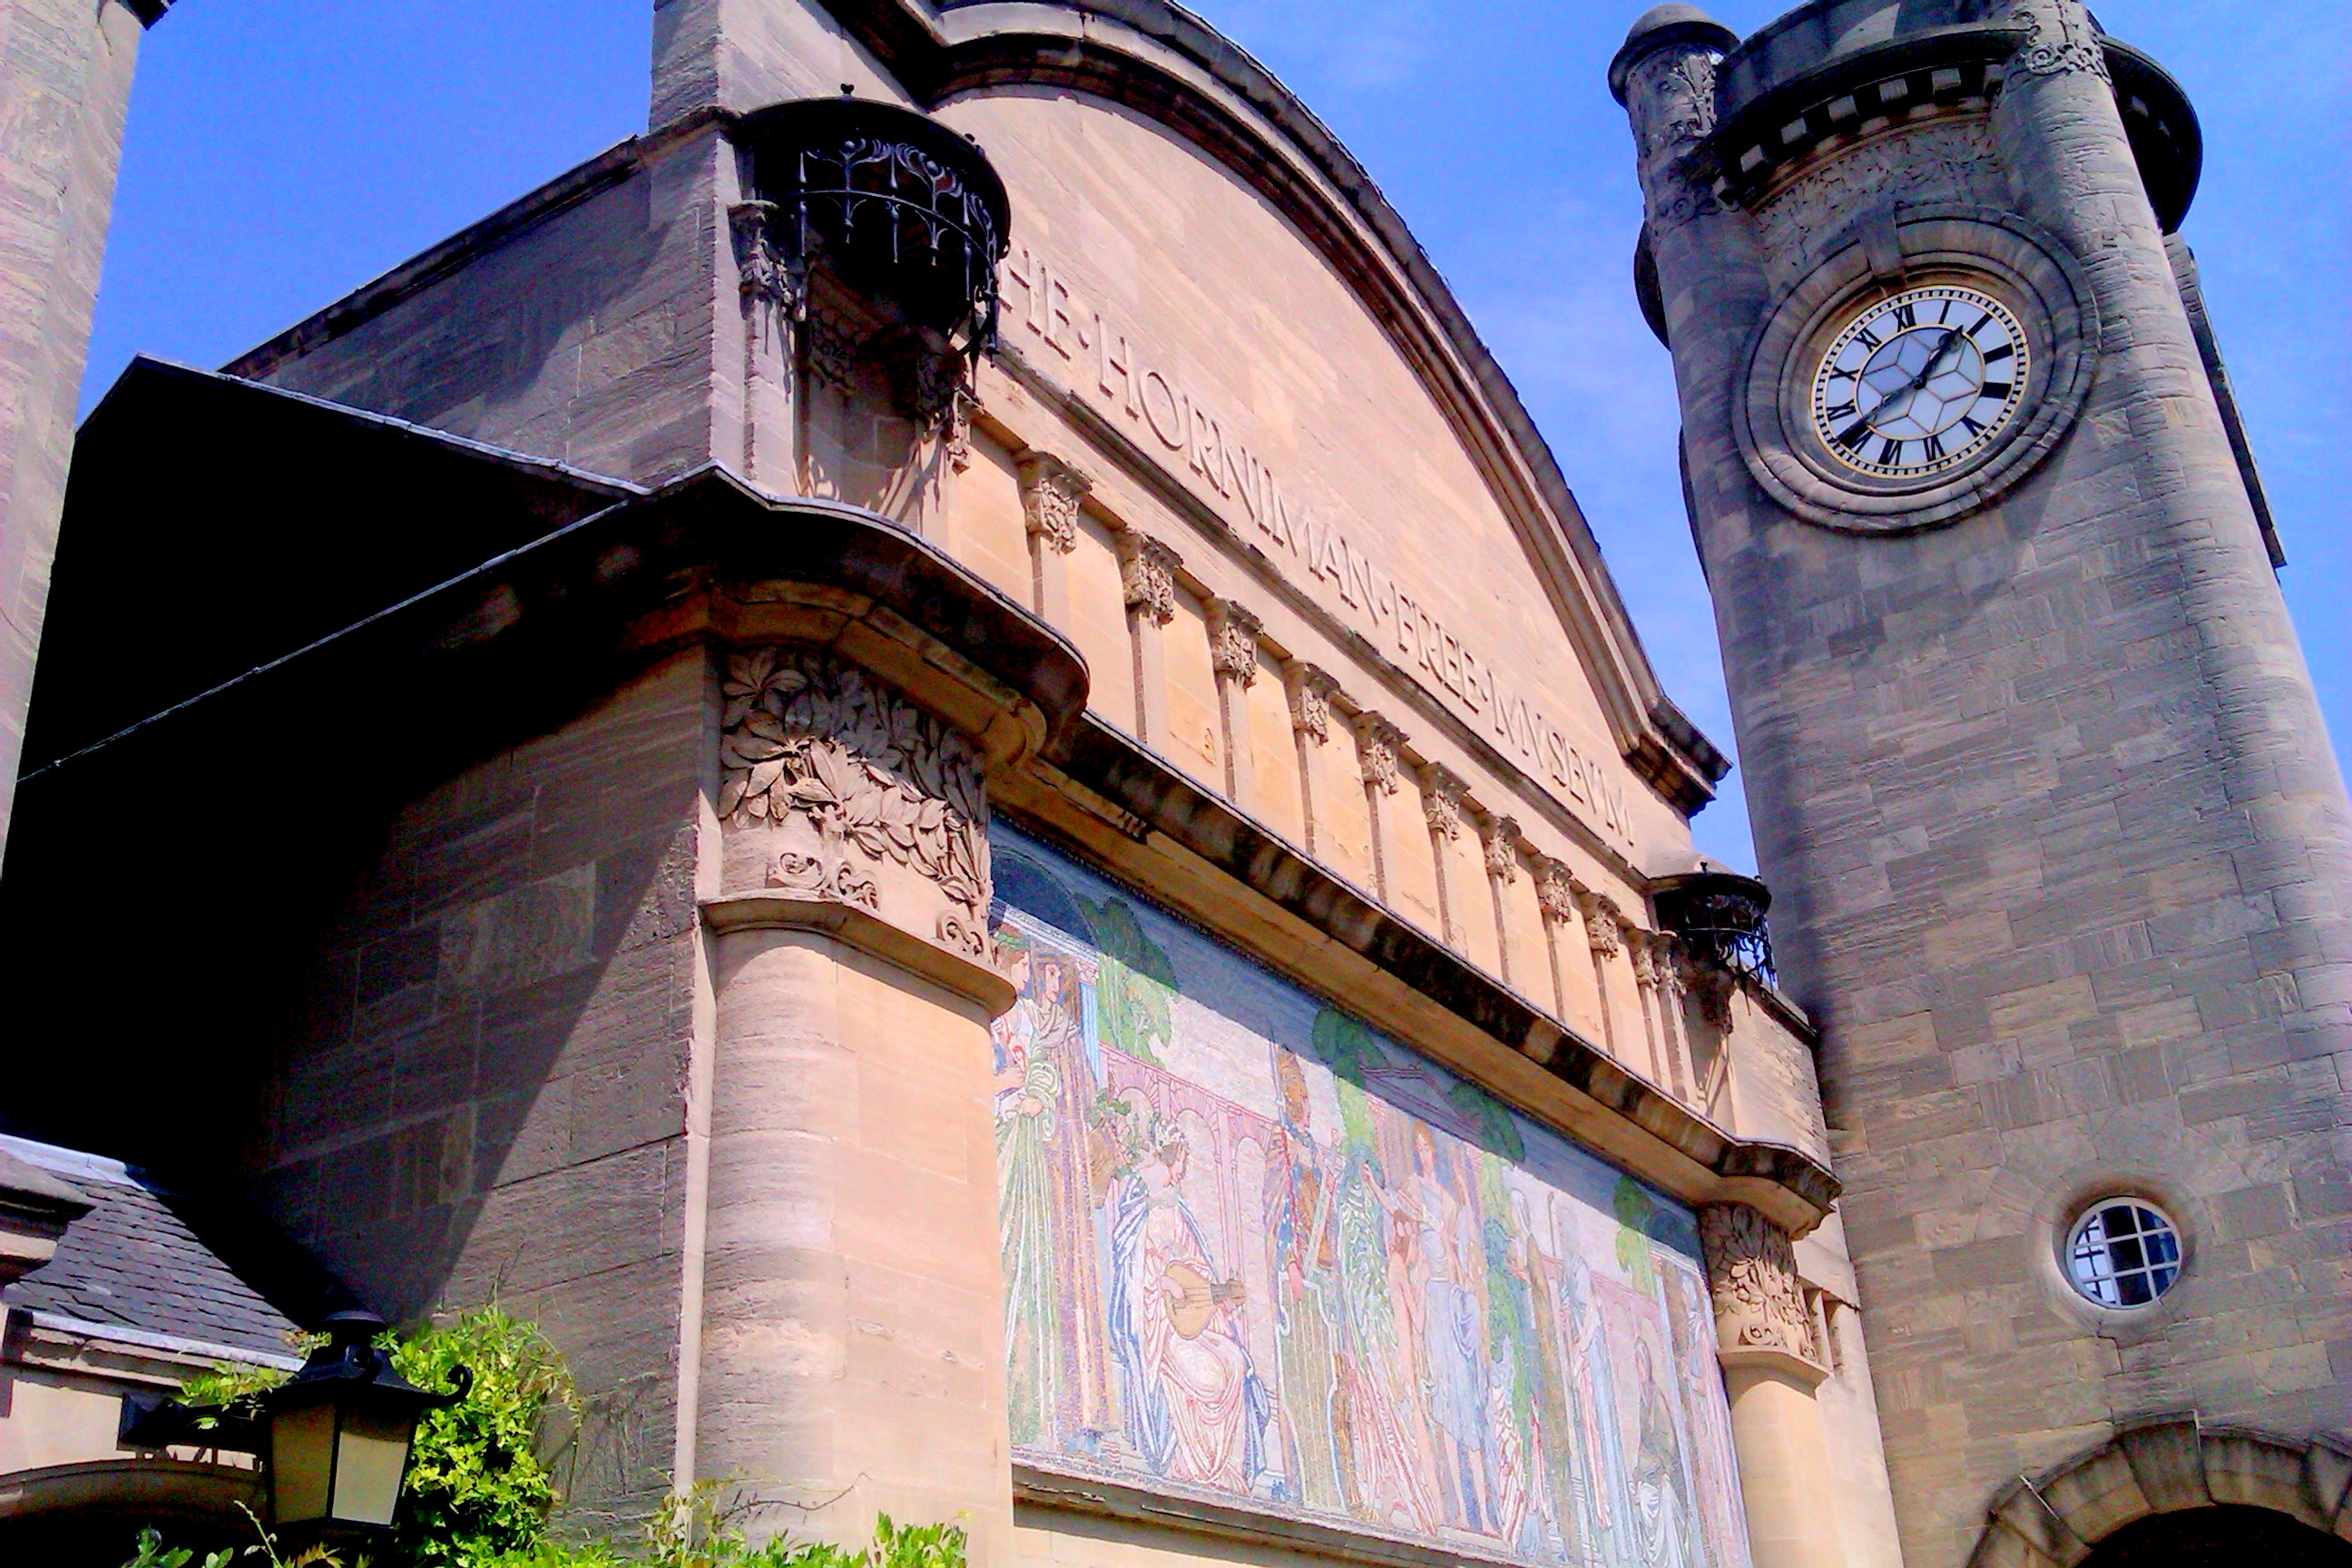 Exterior of the Horniman Museum and Gardens in London, photographed in July 2013. On August 7, the museum agreed to return its collection of Benin Bronzes to Nigeria, the country from which they were taken in the late 19th century. Image courtesy of WikiMedia Commons, photo credit Looshluz. Shared under the Creative Commons Attribution-Share Alike 4.0 International license.